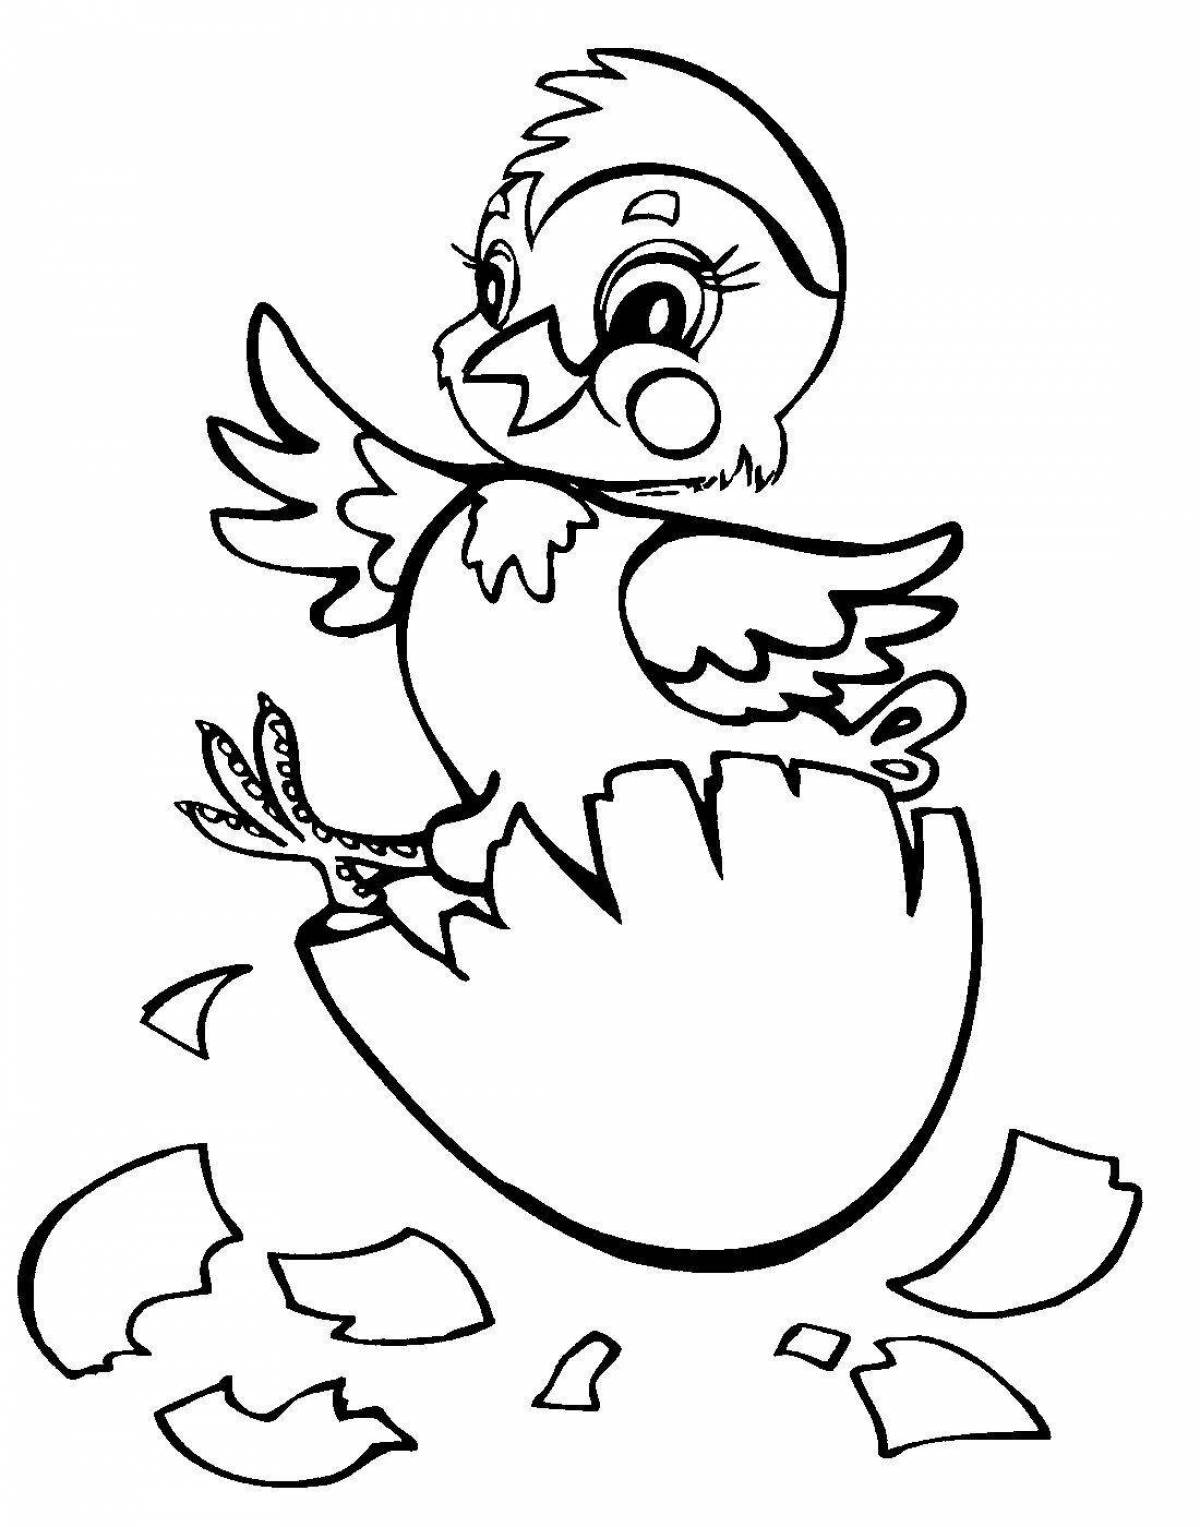 Coloring page cute chick in egg